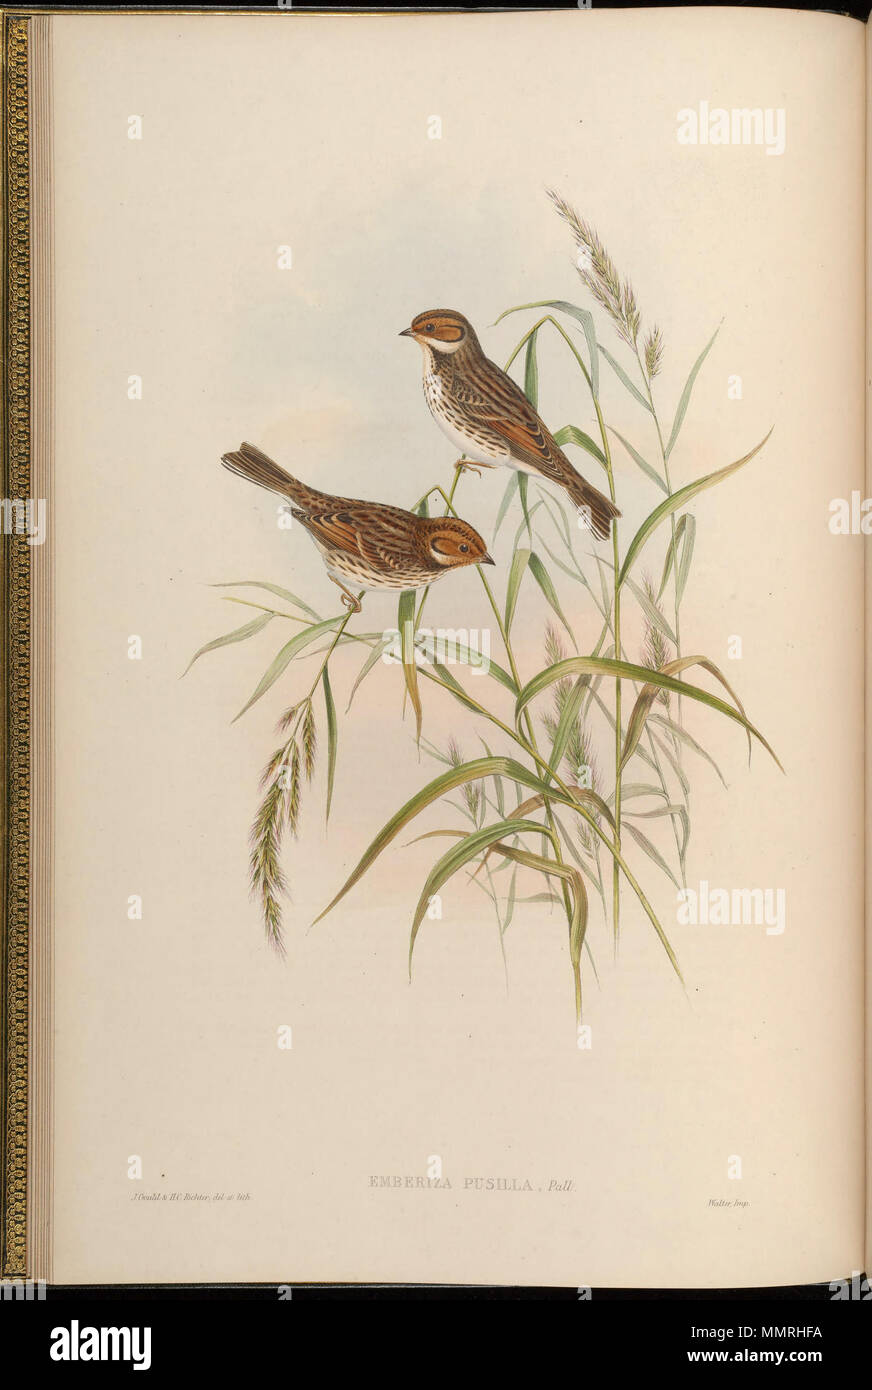 . Emberiza pusilla  . between 1850 and 1883.   John Gould  (1804–1881)      Alternative names Gould  Description British zoologist  Date of birth/death 14 September 1804 2 March 1881  Location of birth/death Lyme Regis London  Authority control  : Q313787 VIAF:?29597222 ISNI:?0000 0001 2125 9888 ULAN:?500006638 LCCN:?n79100355 NLA:?35137514 WorldCat    &  Henry Constantine Richter  (1821–1902)    Description British animal painter  Date of birth/death 1821 16 March 1902  Location of birth Royal Borough of Kensington and Chelsea  Authority control  : Q1567083 VIAF:?227079511 ISNI:?0000 0003 647 Stock Photo